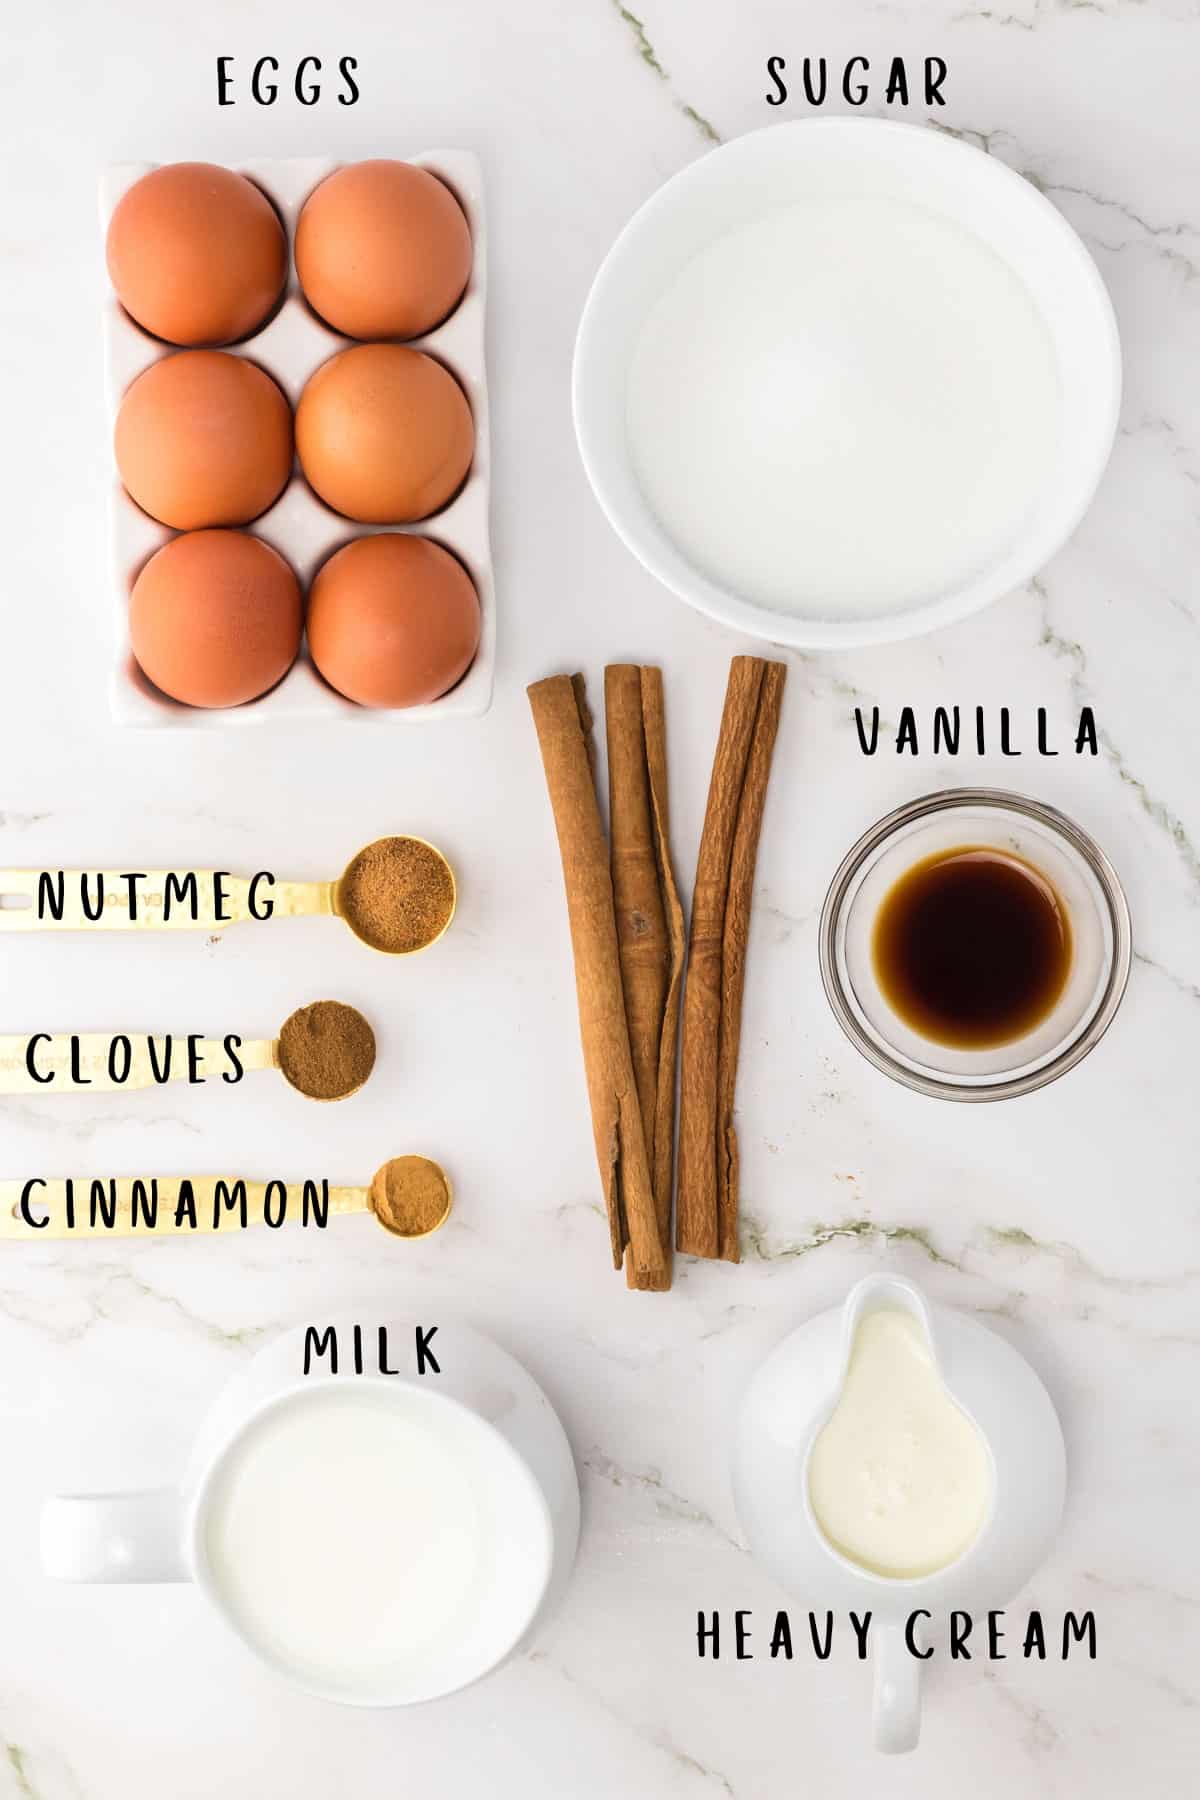 Ingredient image of items needed for eggnog recipe.